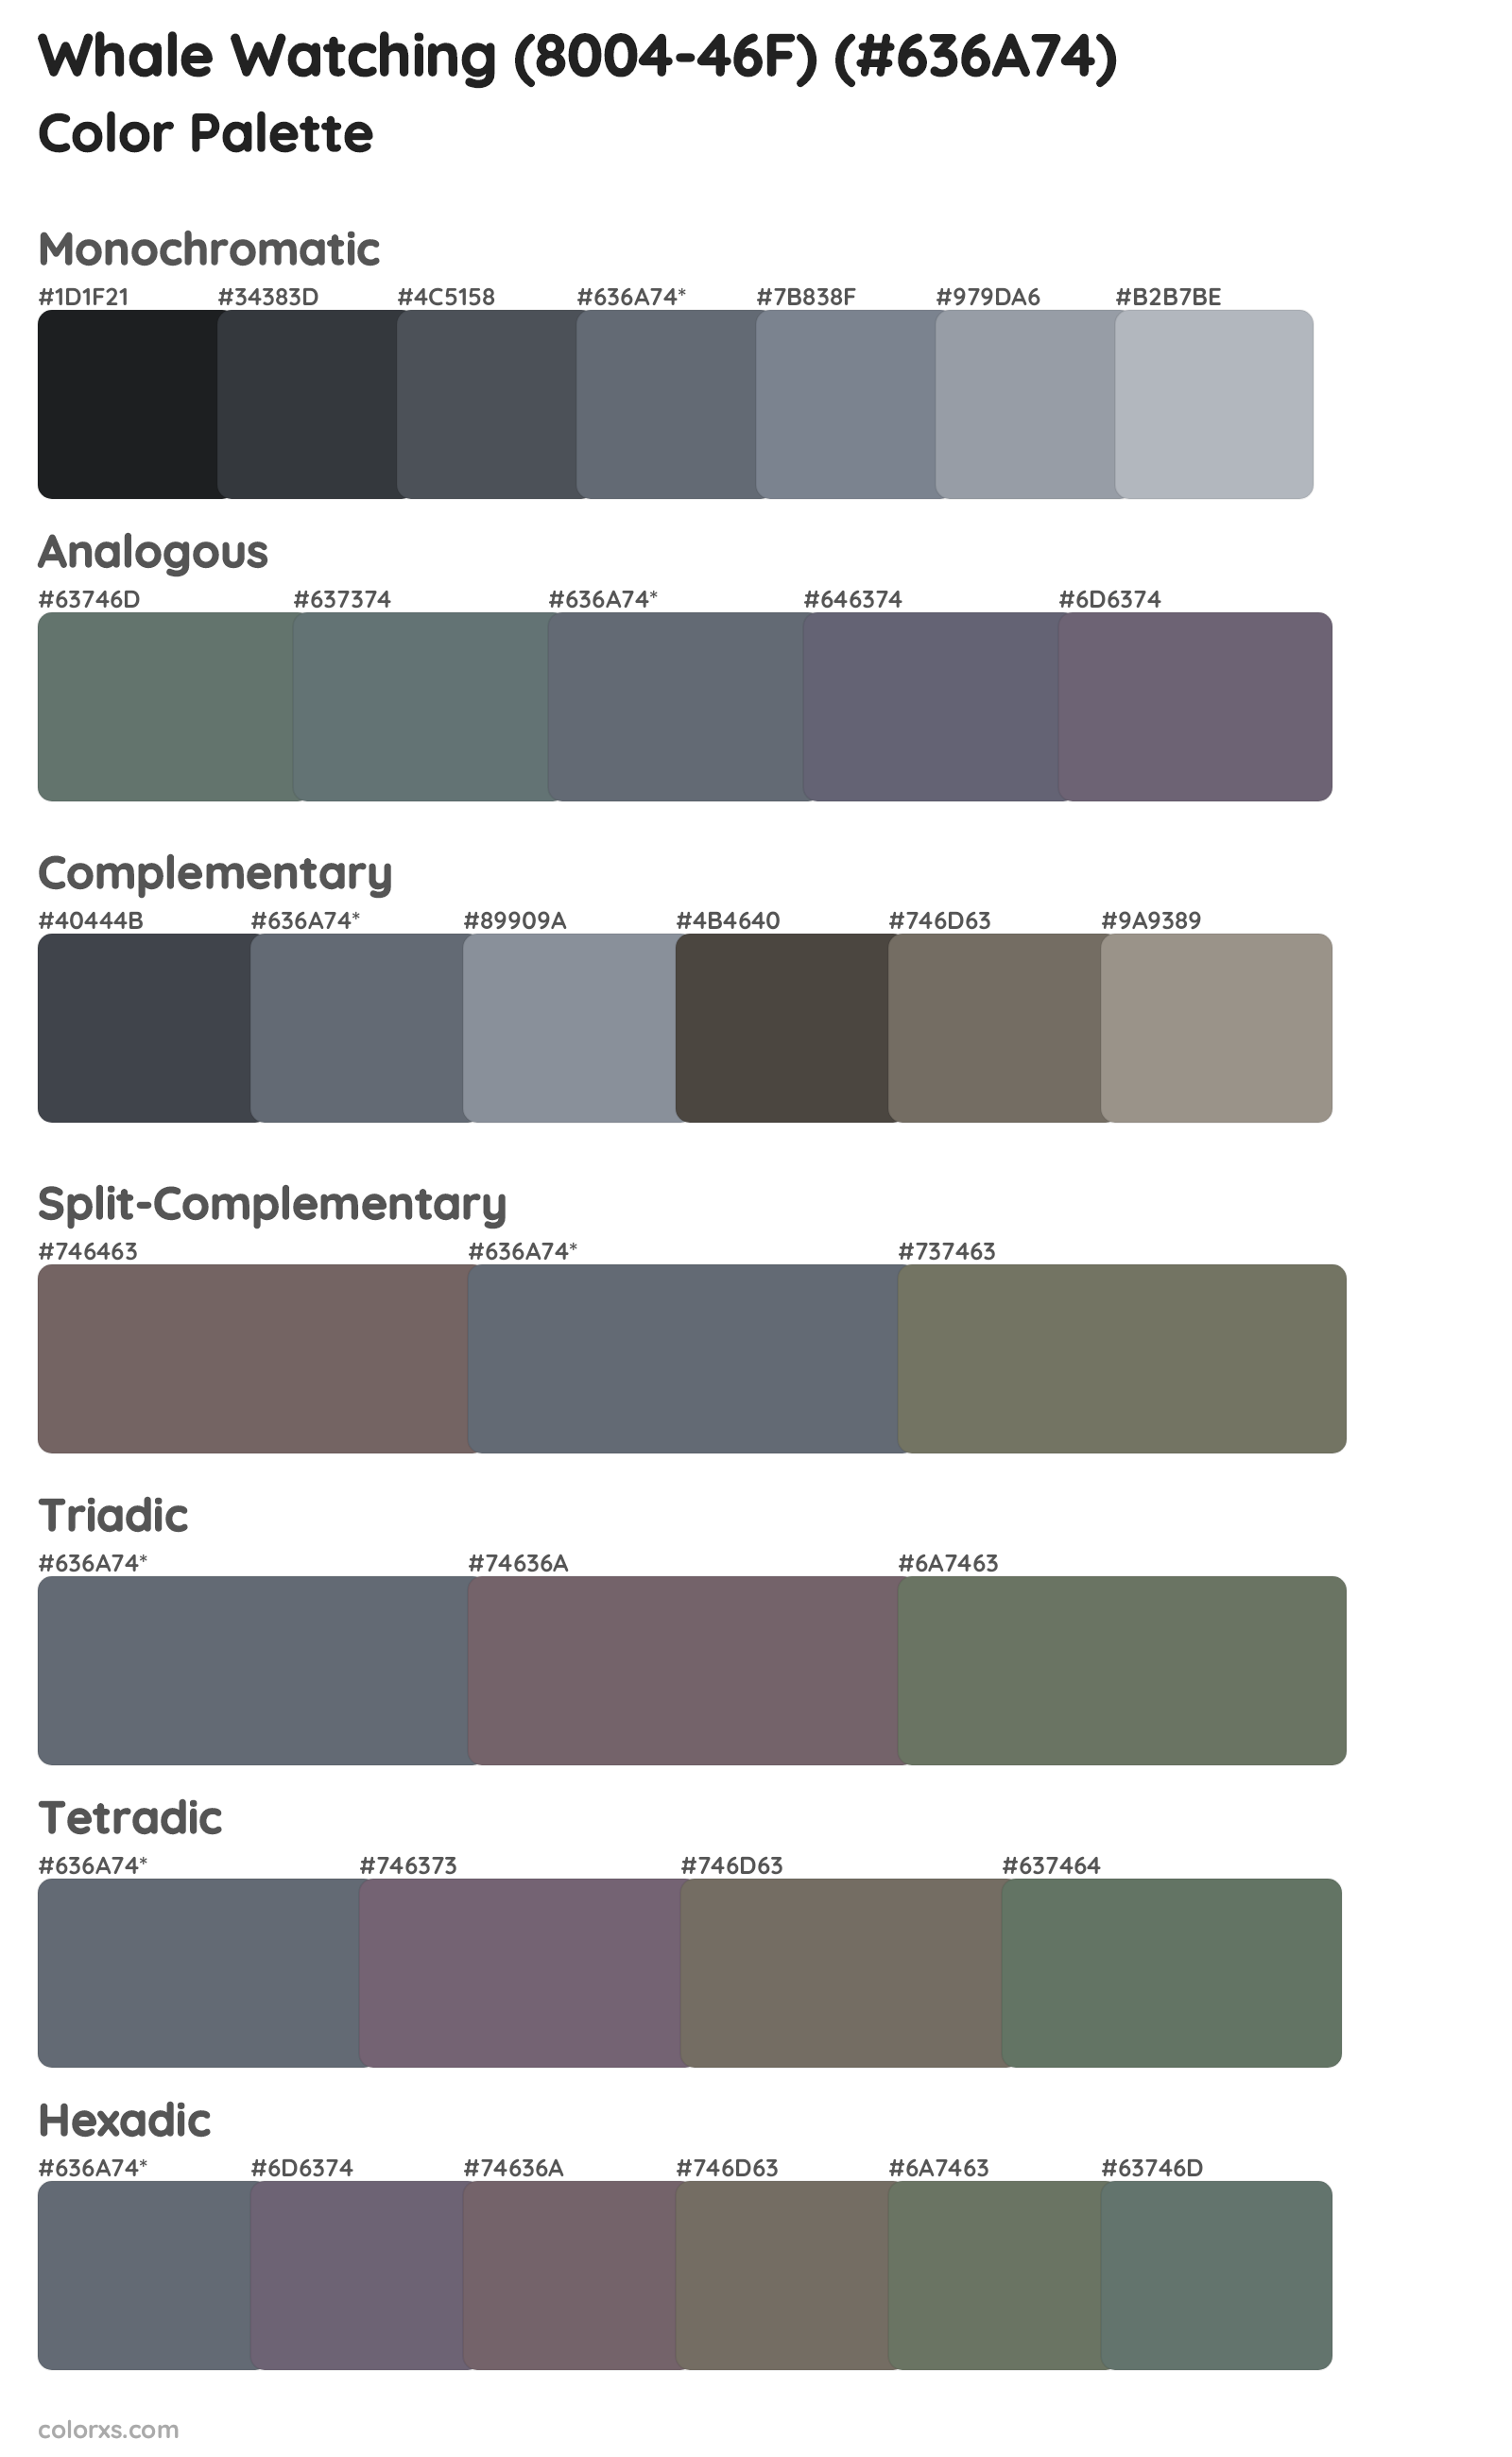 Whale Watching (8004-46F) Color Scheme Palettes